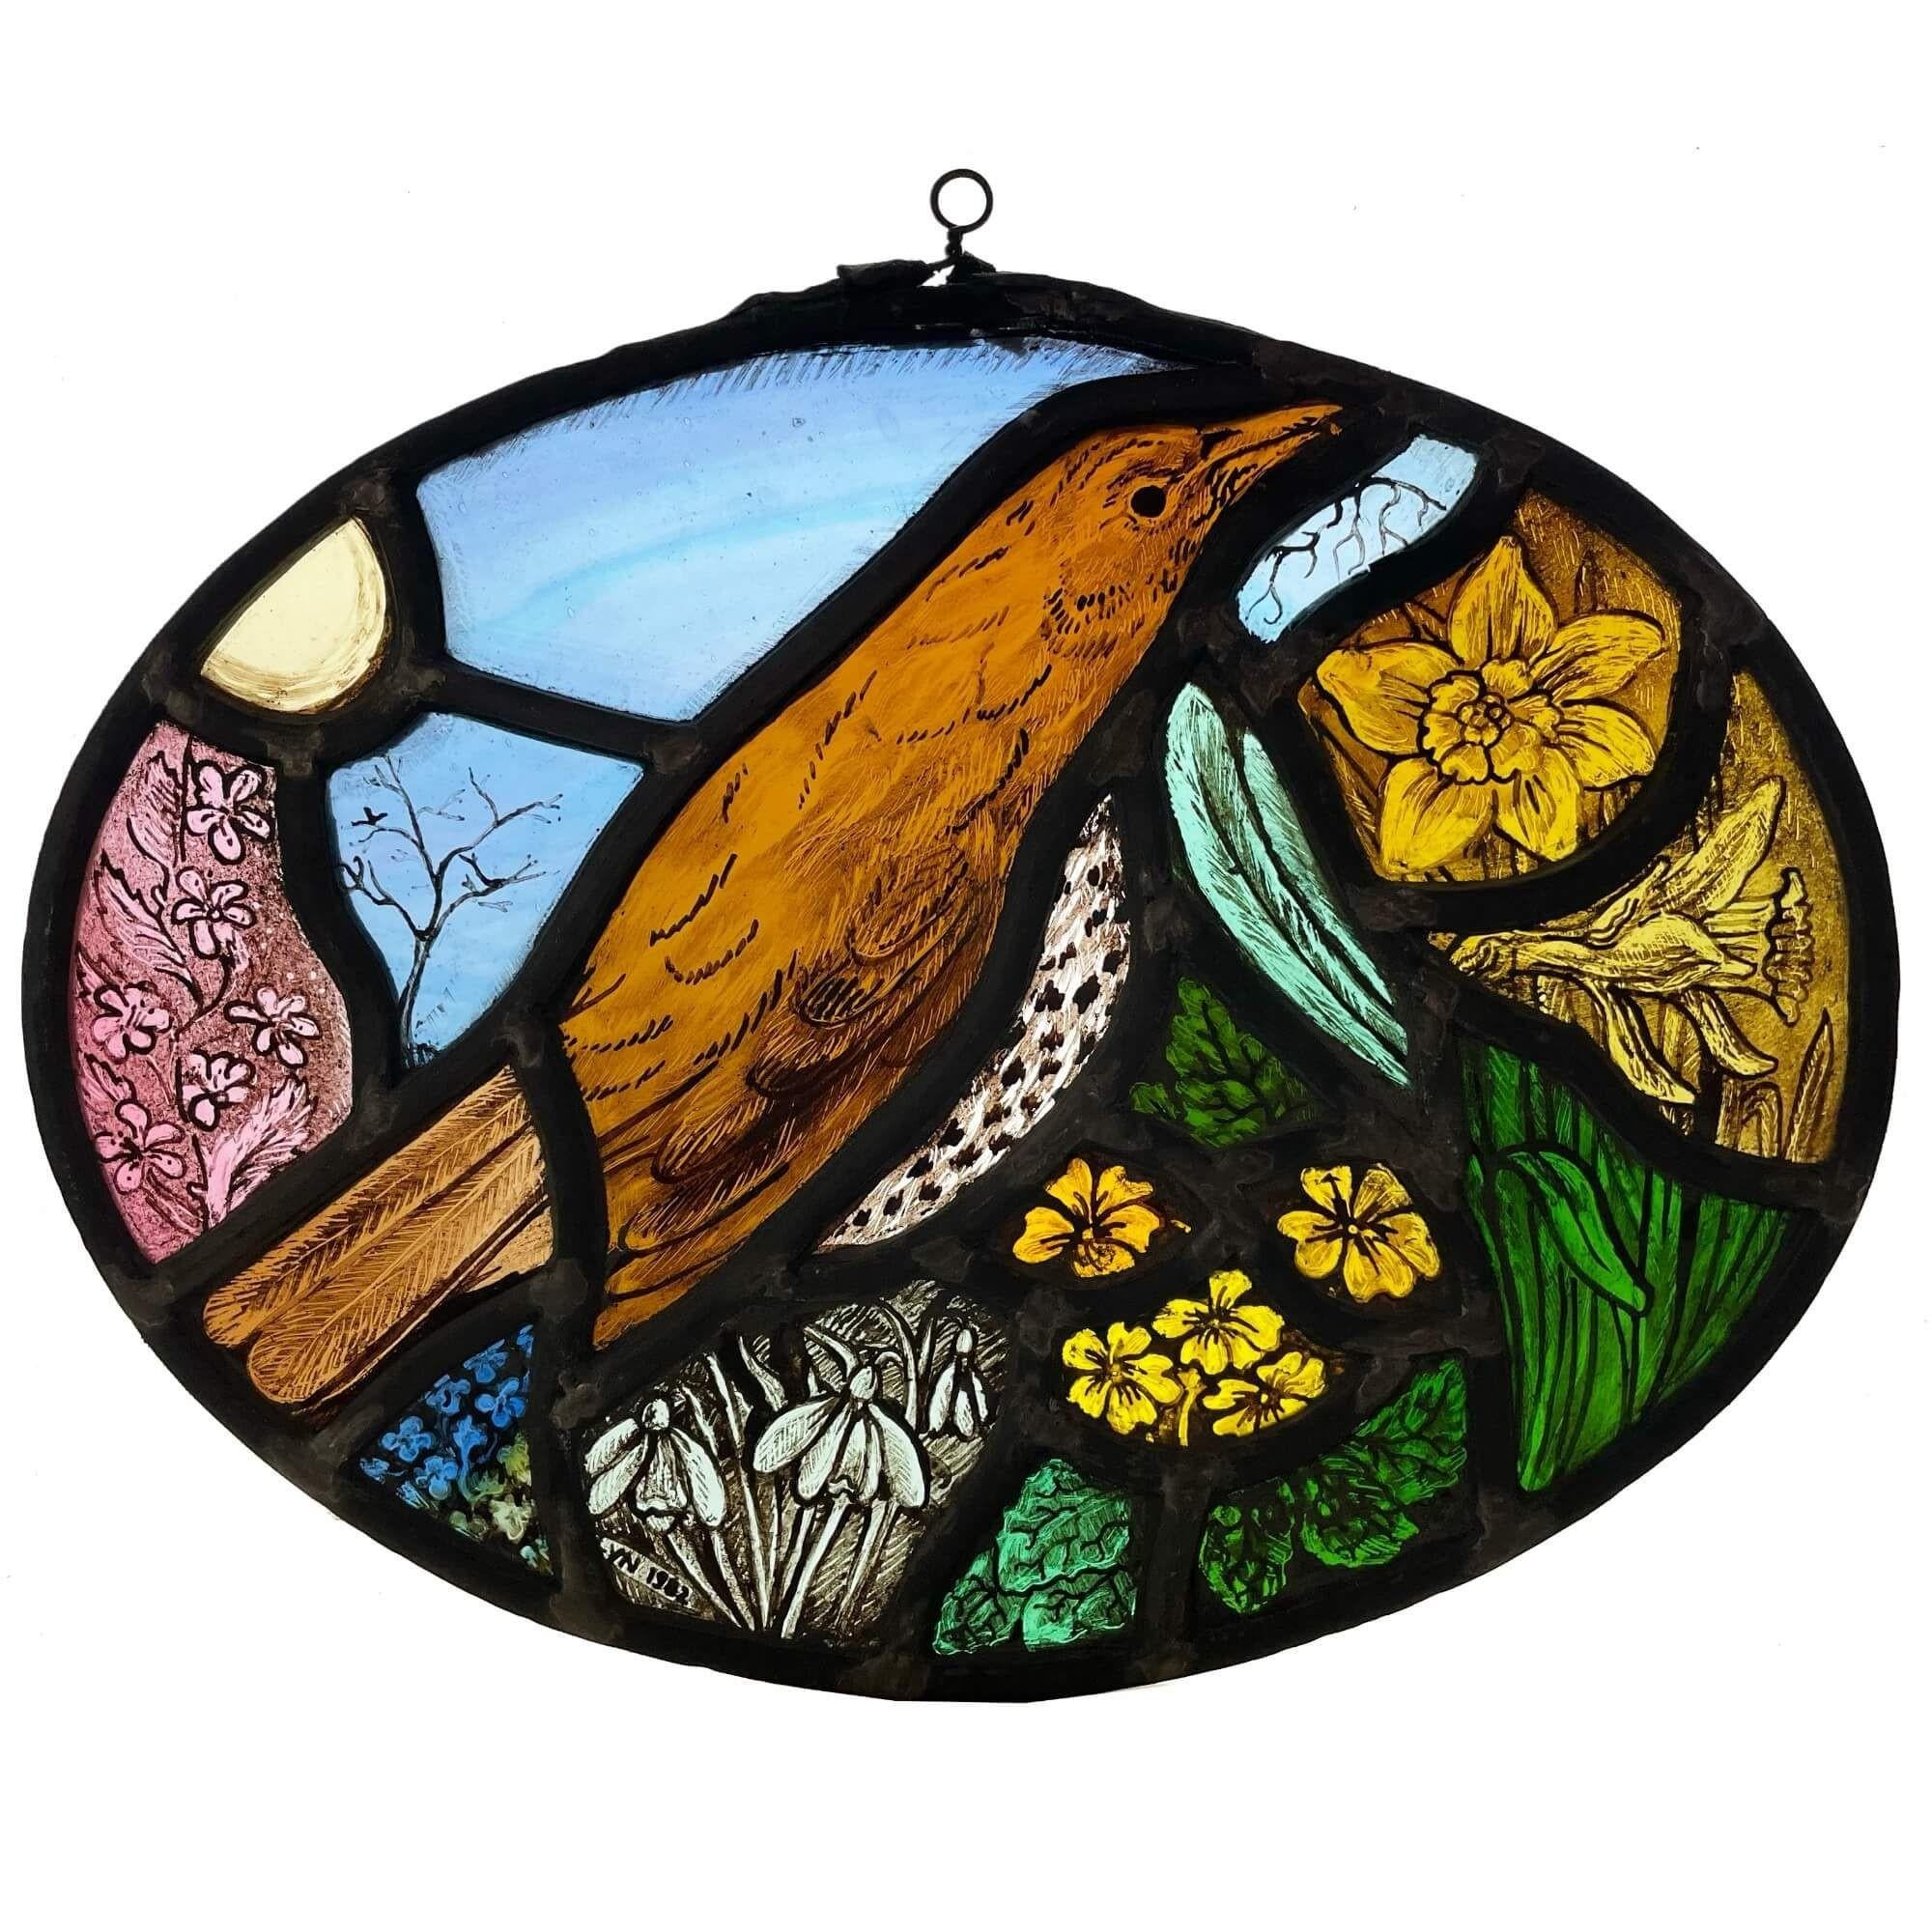 This picturesque set of 4 oval stained glass window hangings by British artist Lyn Claydon depict scenes of the four seasons. Dating from the late 20th century, they are a beautiful set, detailing British wildlife and animals including birds, a